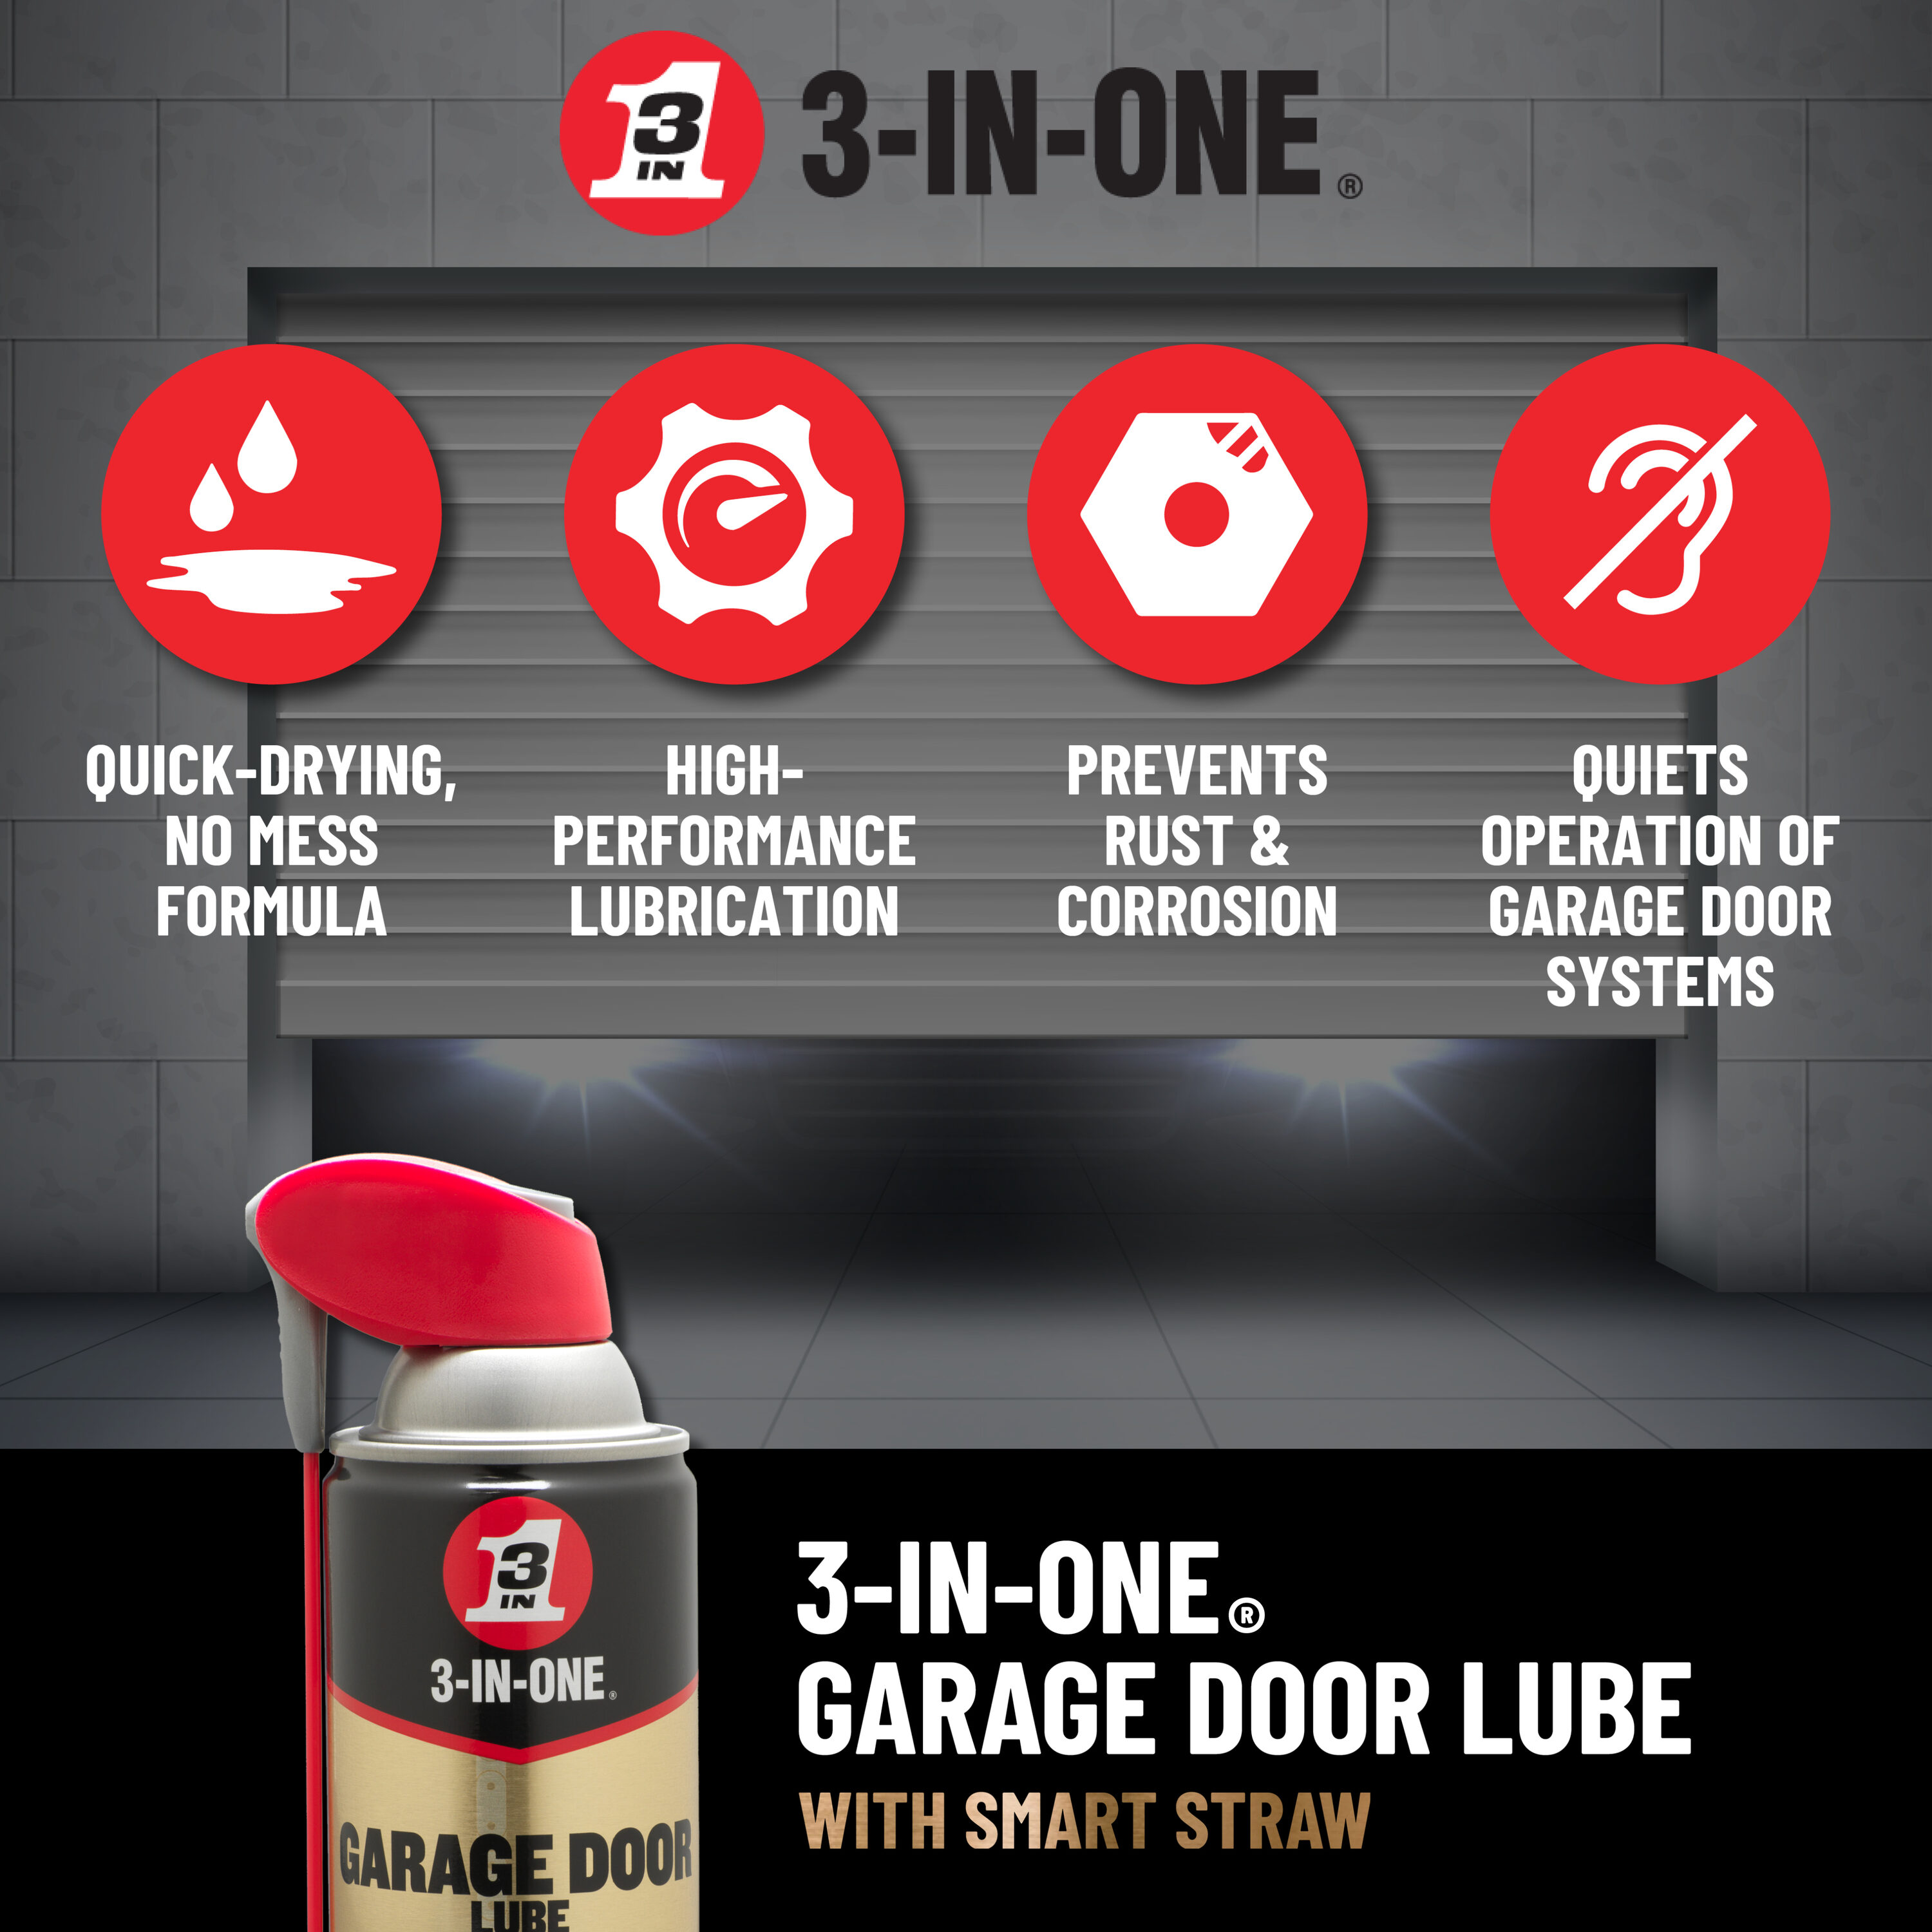 3-IN-ONE Oil - Wondering what you should use 3-IN-ONE Garage Door Lube on?  Check out this helpful picture! 3-IN-ONE Garage Door Lube is a quick  drying, high performance lubricant for residential or